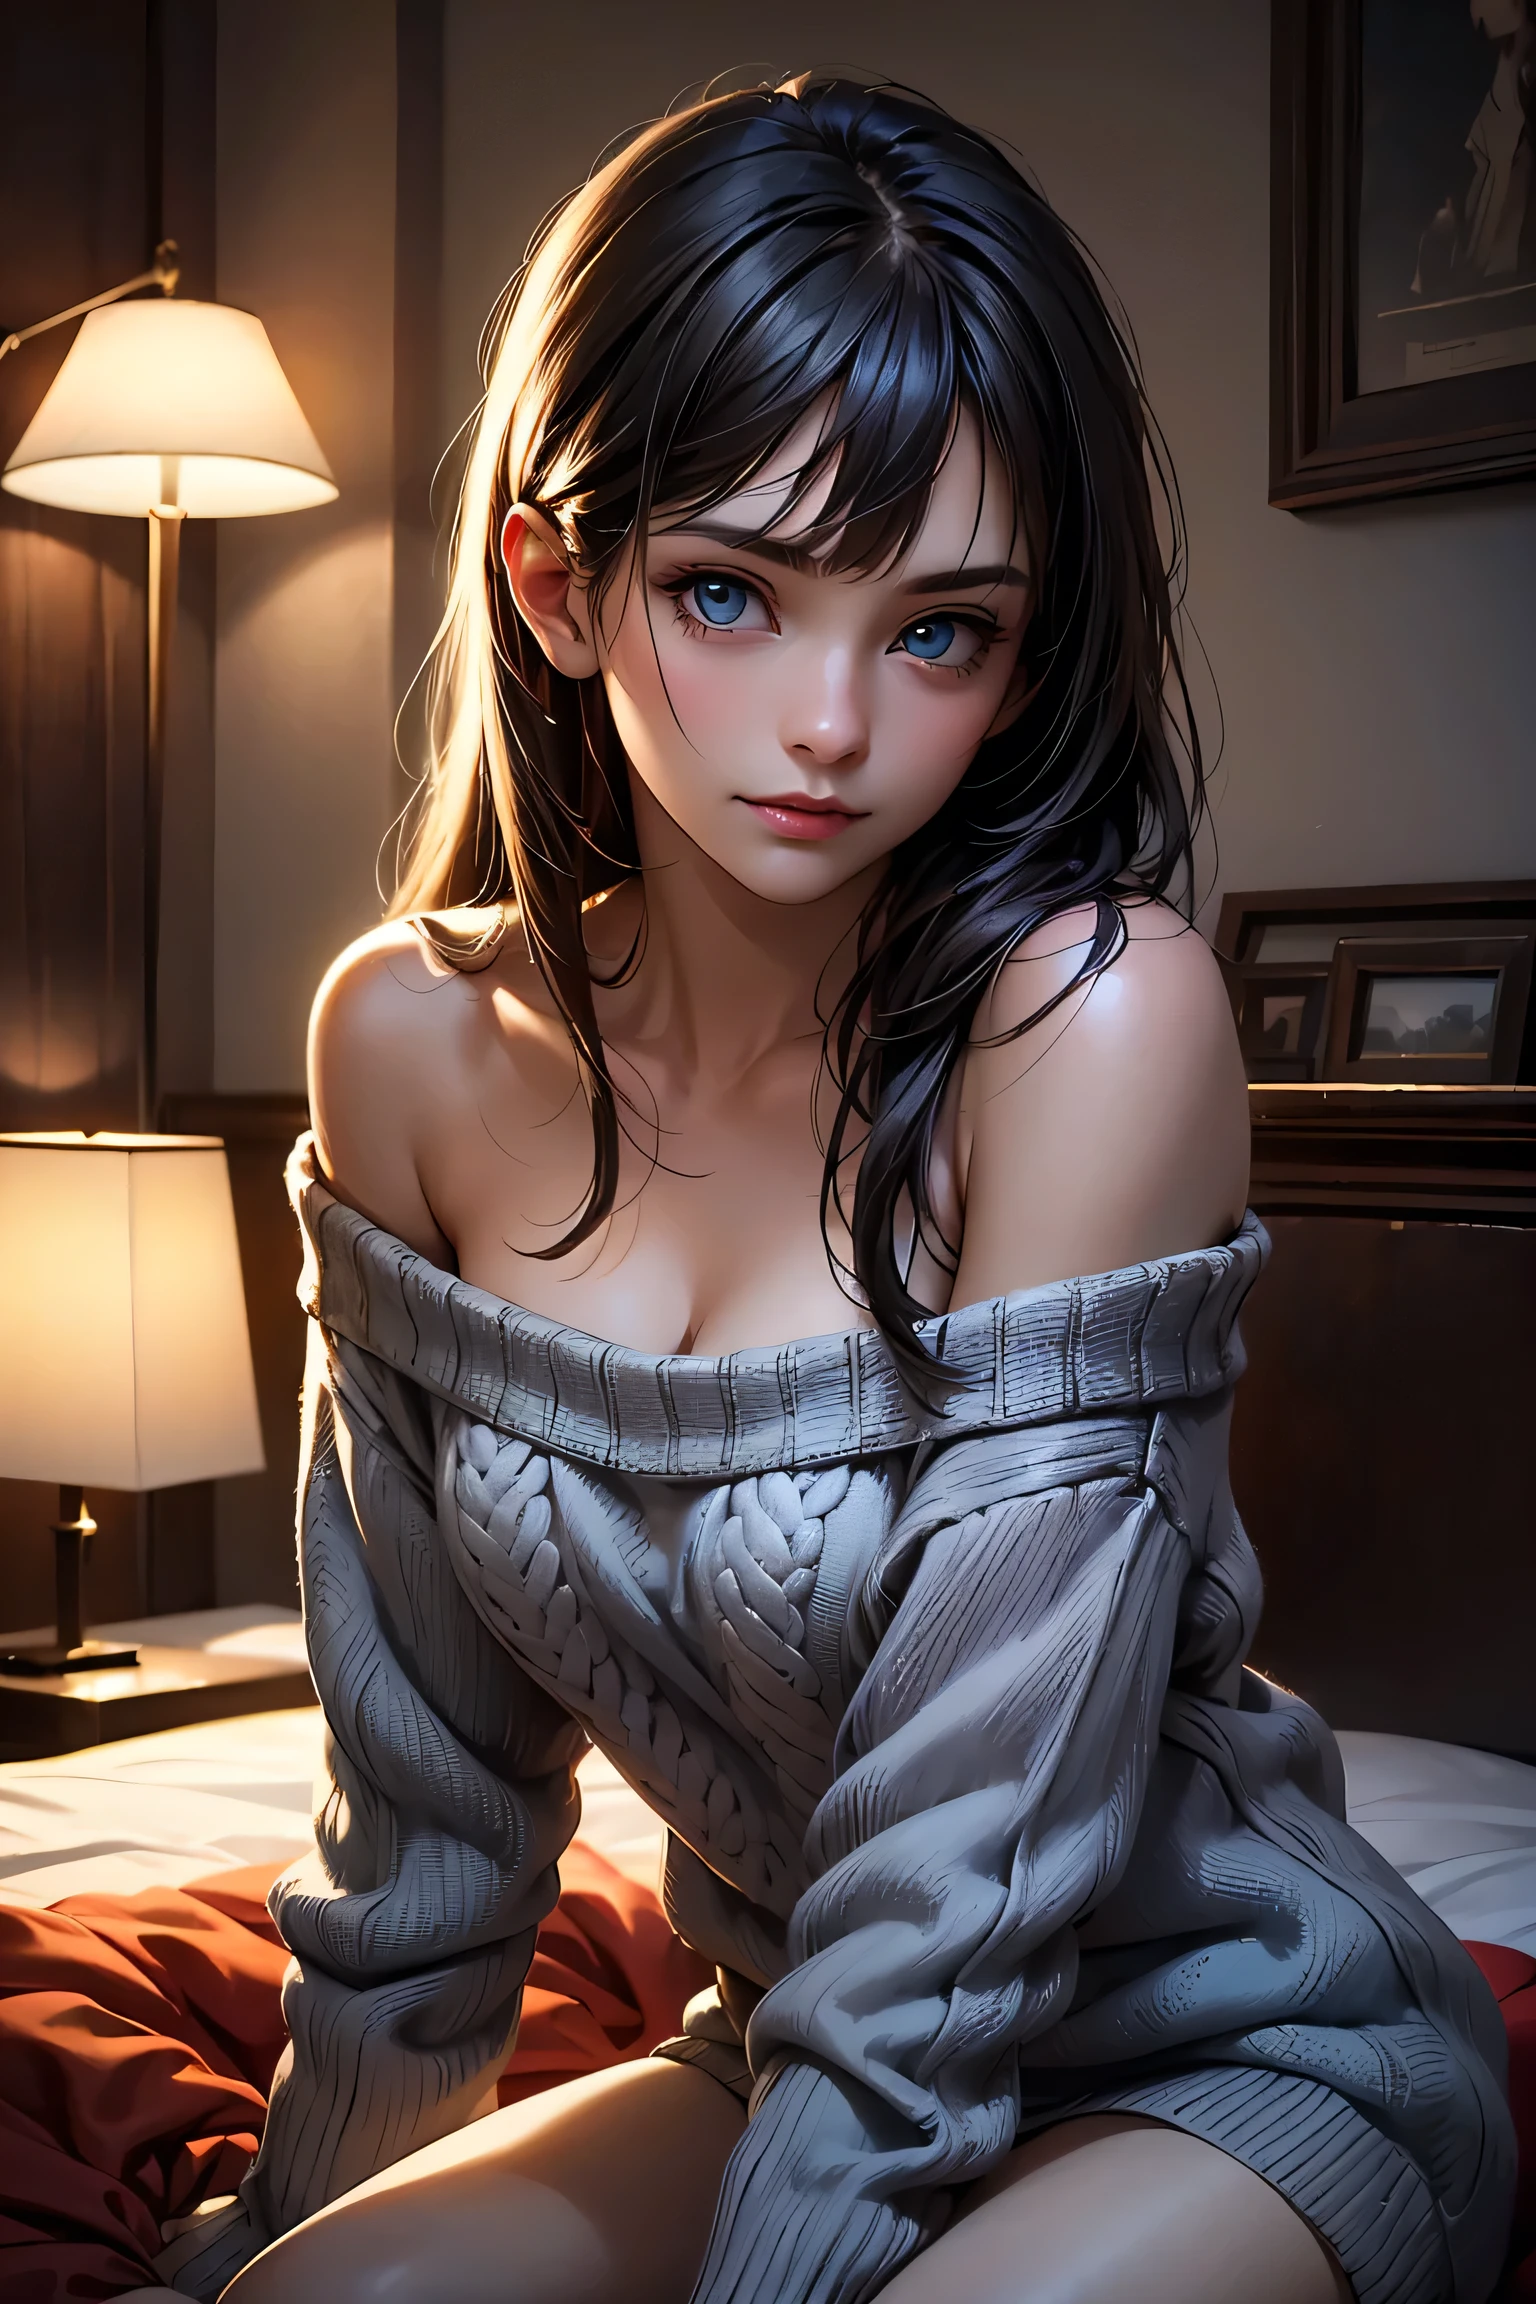 Masterpiece, best quality, high resolution, ultra detailed, slight smile, a woman long dark hair with bangs, light blue eyes, a beautiful girl looking at the camera, Frontal view, ((off-the-shoulder light red sweater,)) bare legs, night, warm interior room, image illuminated by a small lamp, depth of field, (half body: 0.6),